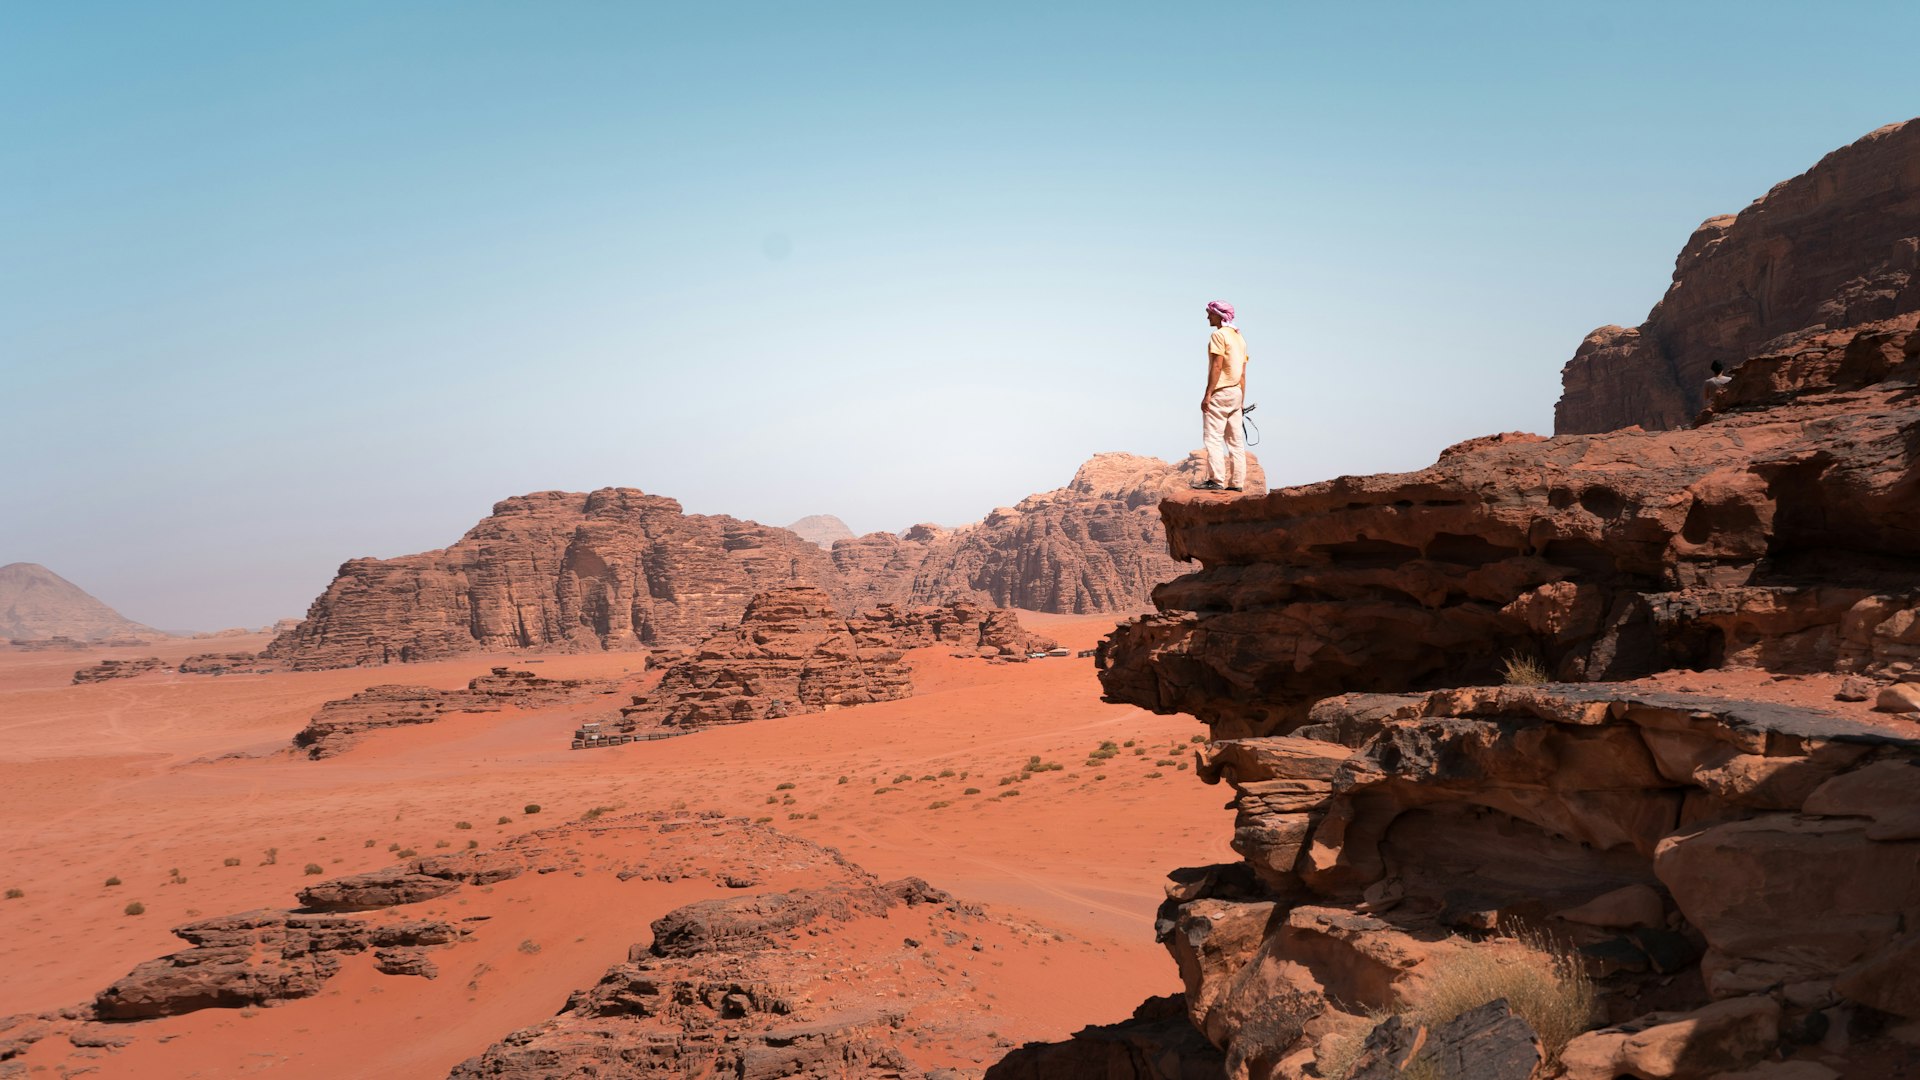 A young man stands on a cliff at Wadi Rum desert, Jordan, Middle East